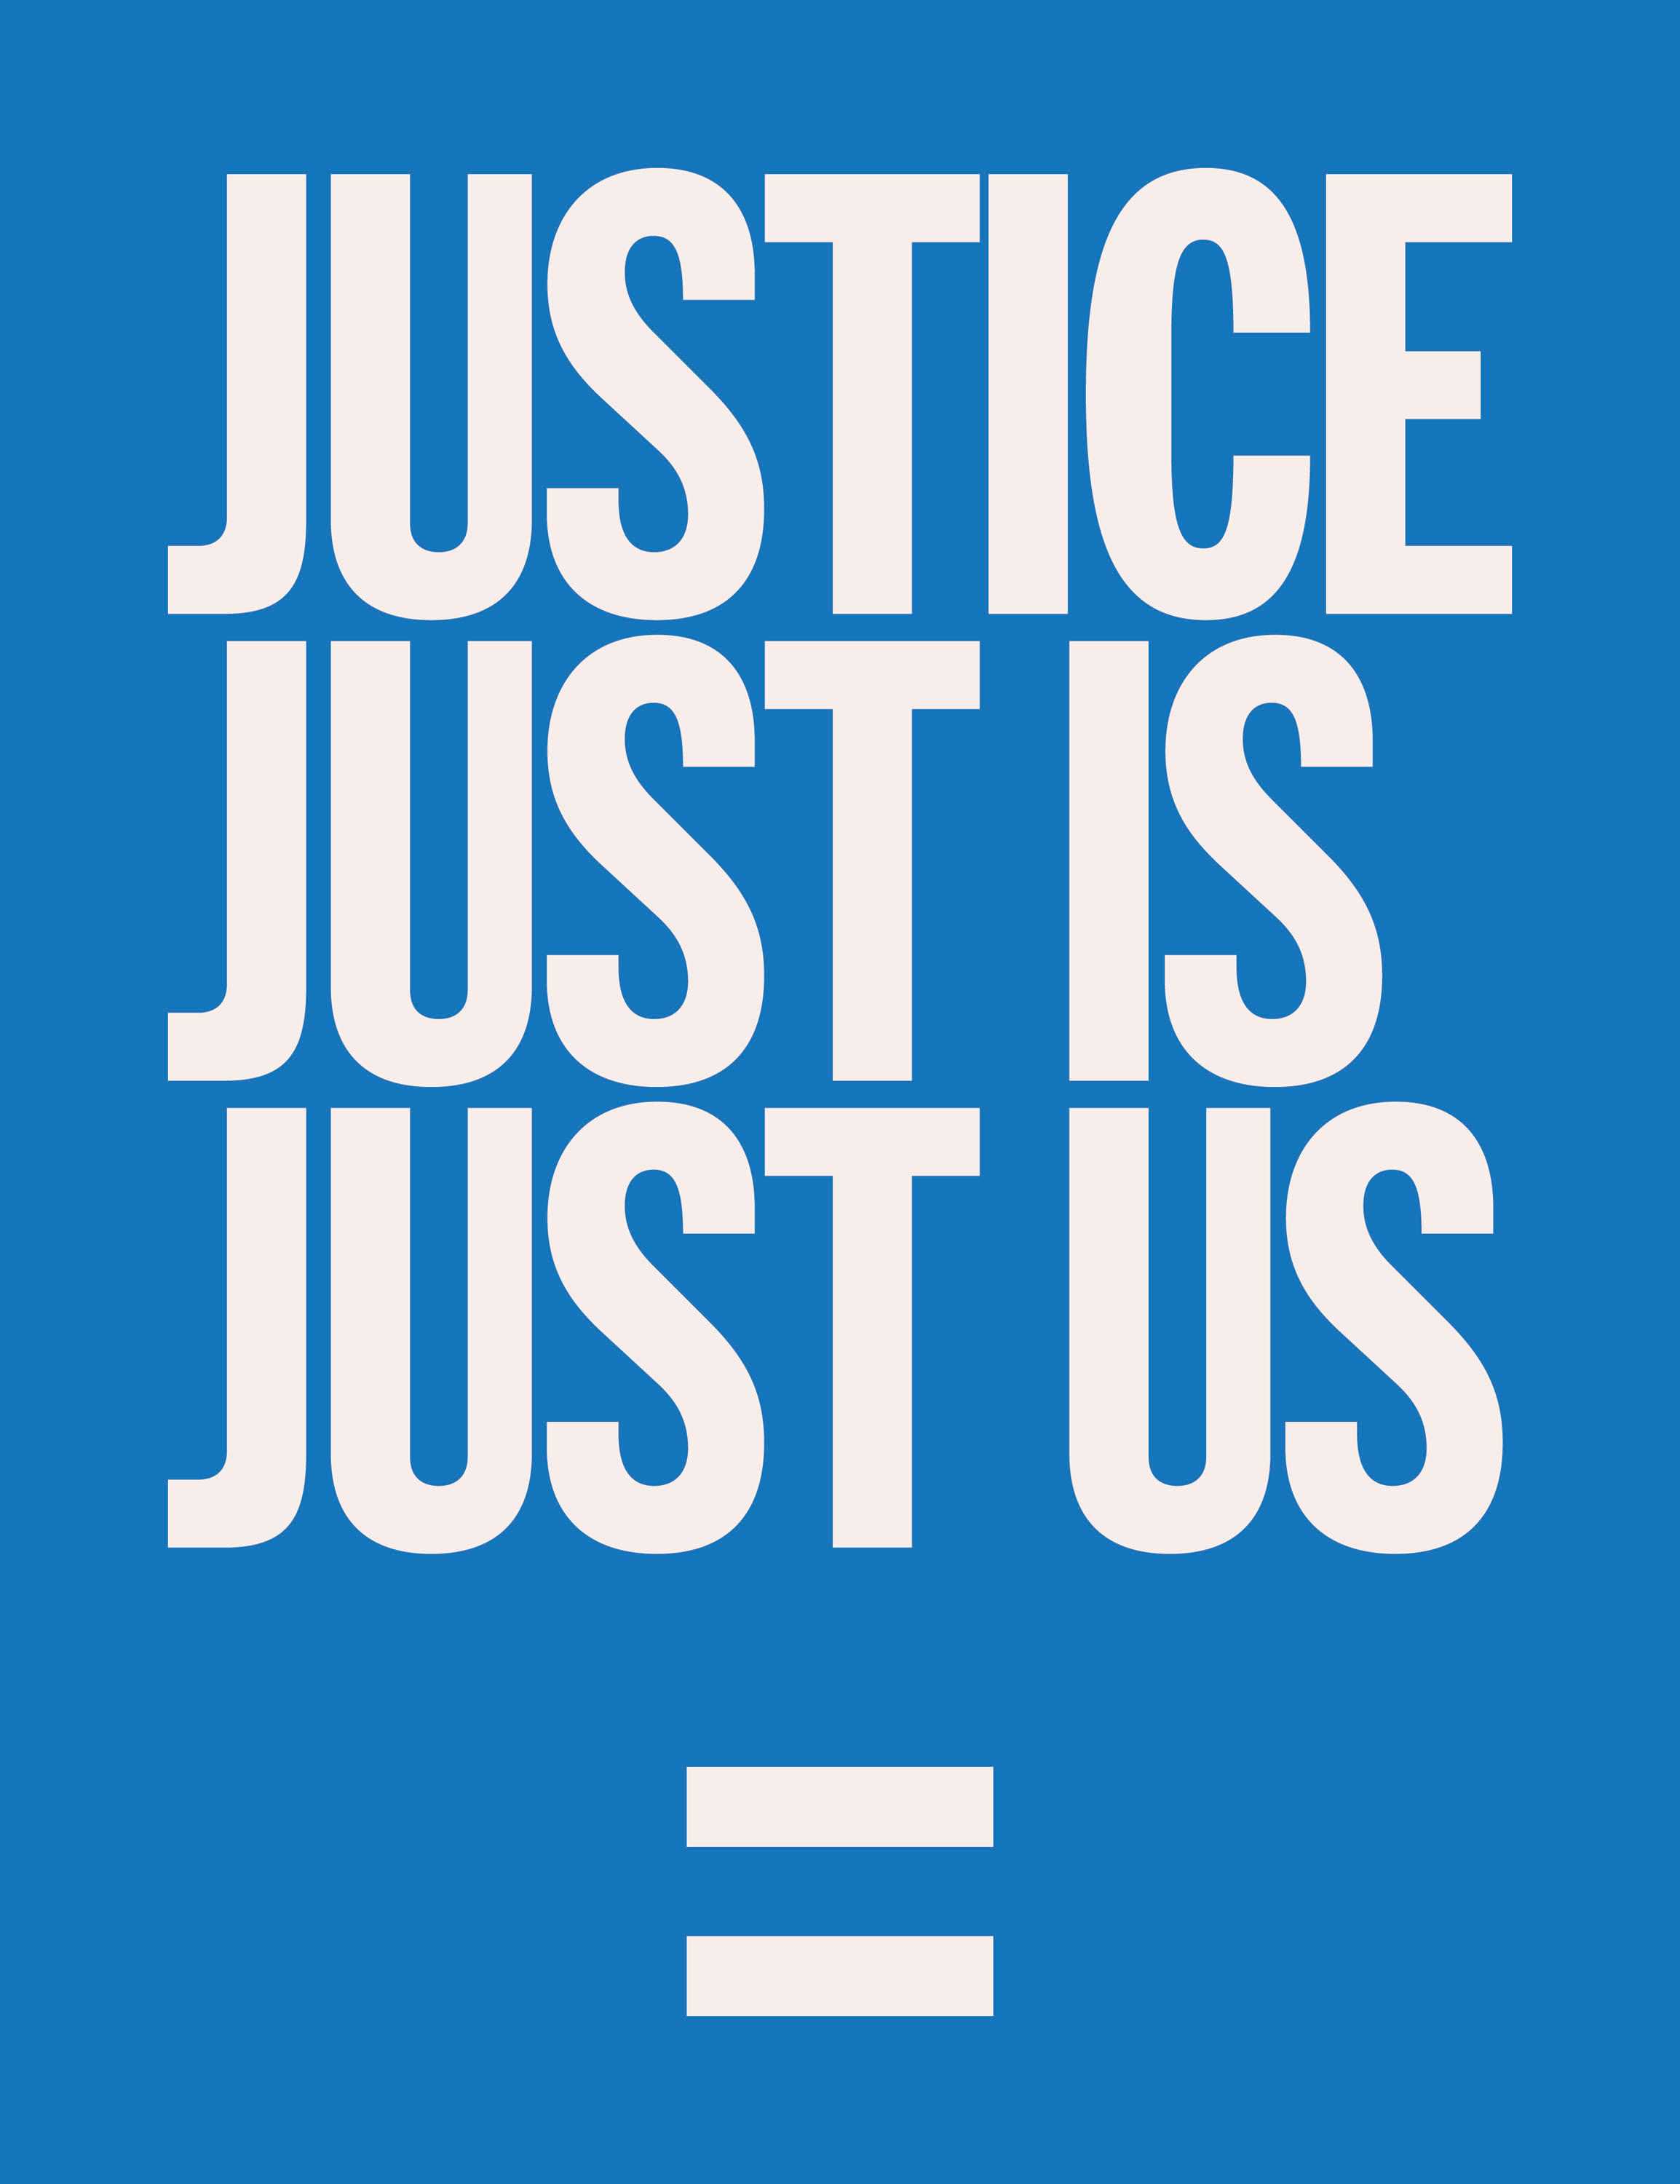 Sky blue poster with writing "JUSTICE JUST IS JUST US in white block lettering.